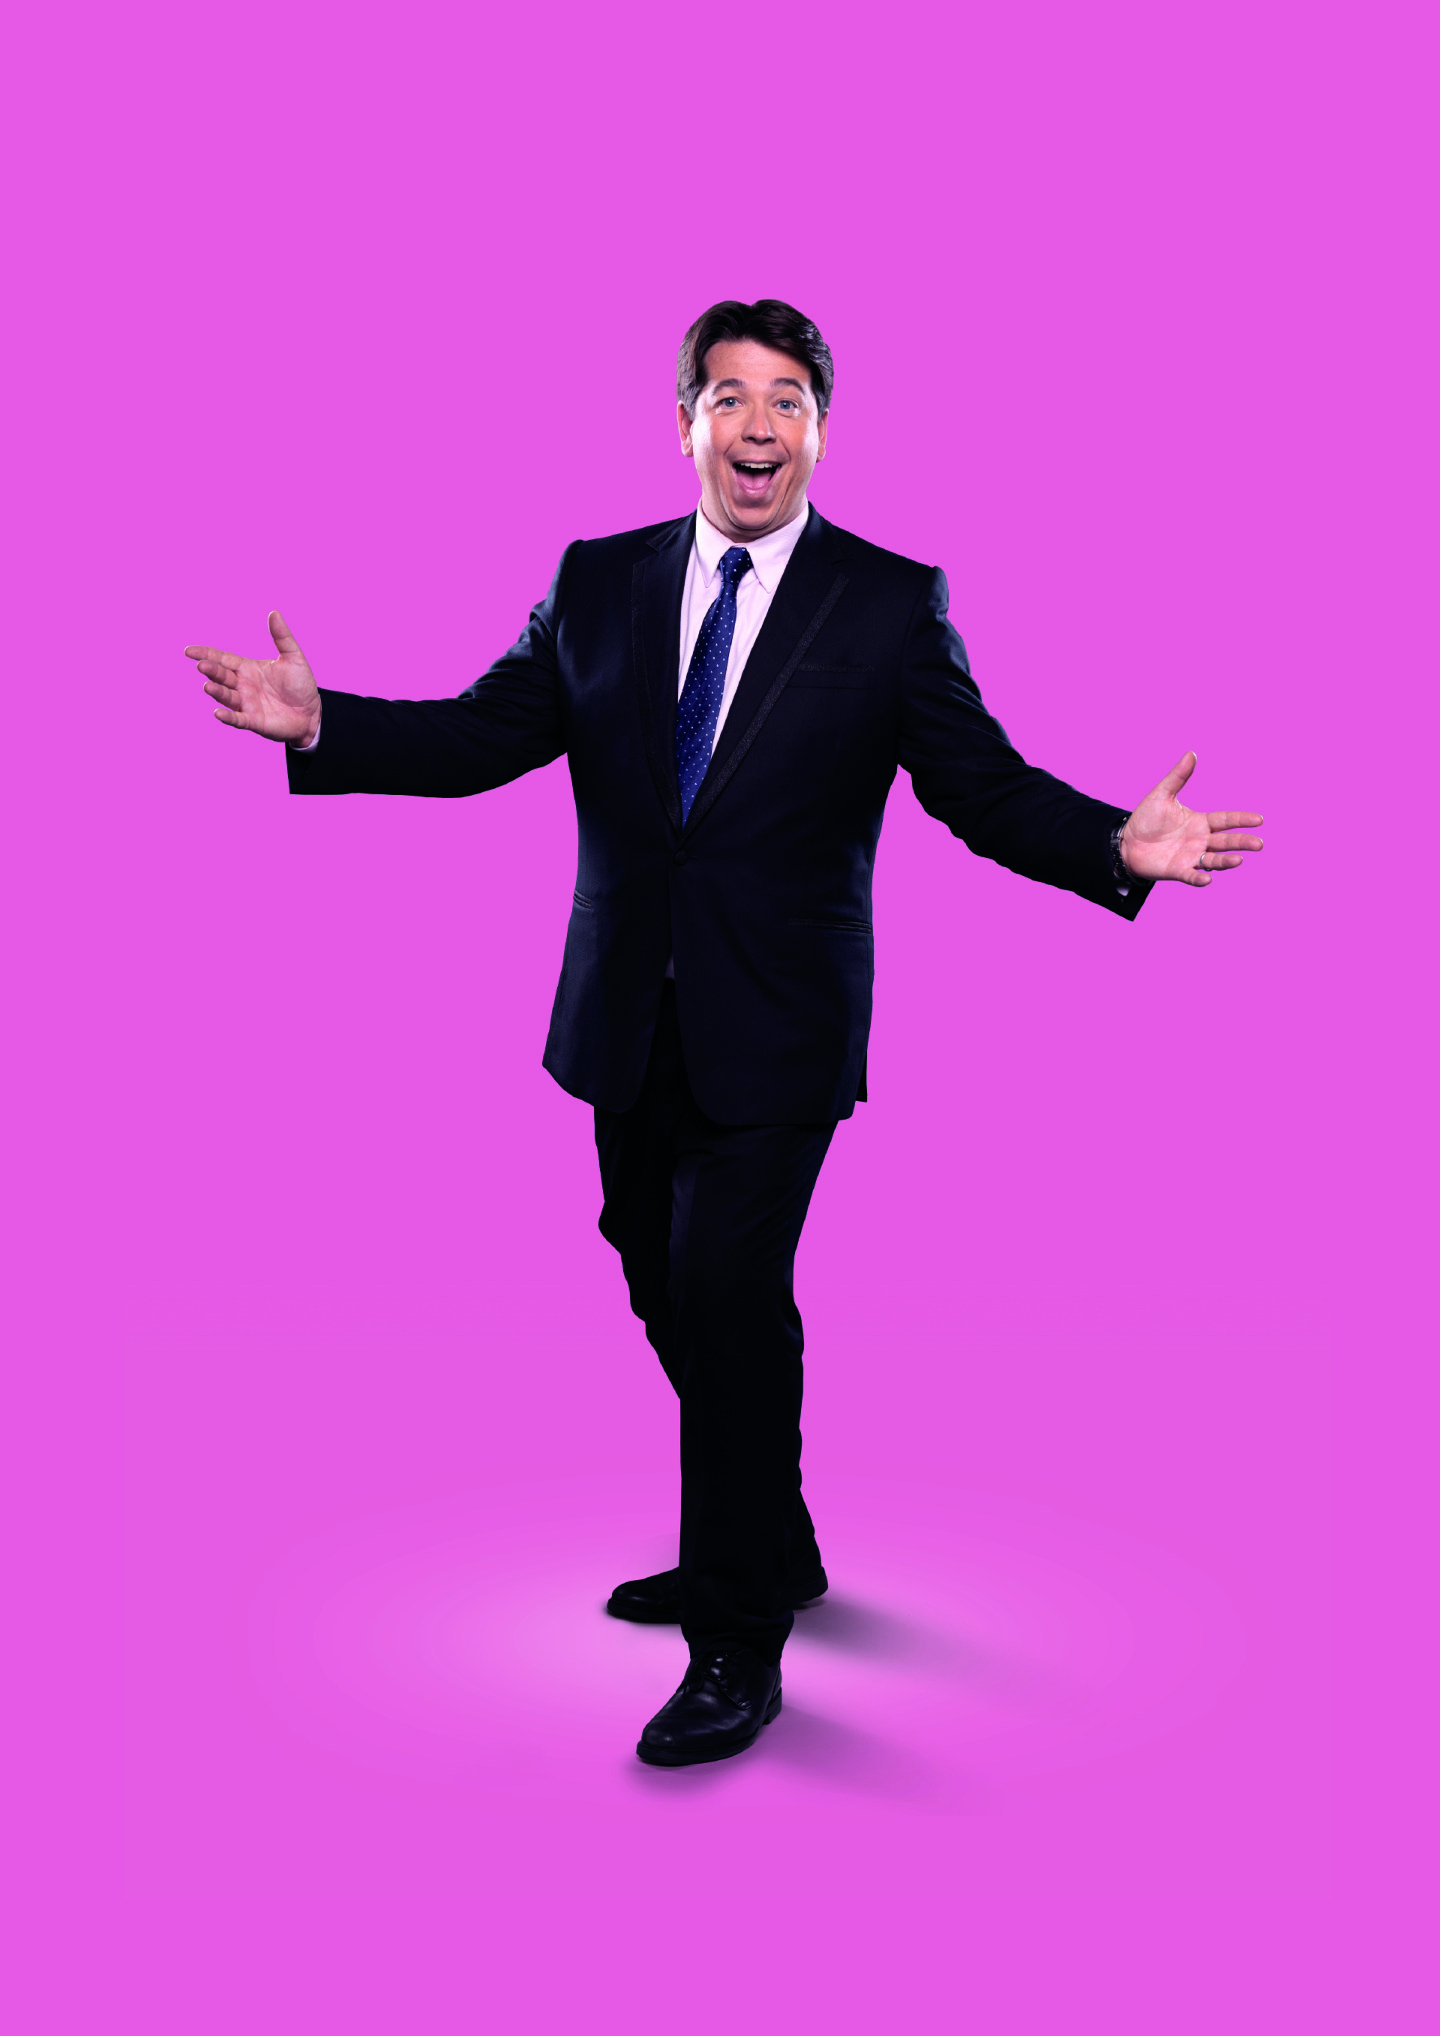 Michael McIntyre on a pink background for his new tour.